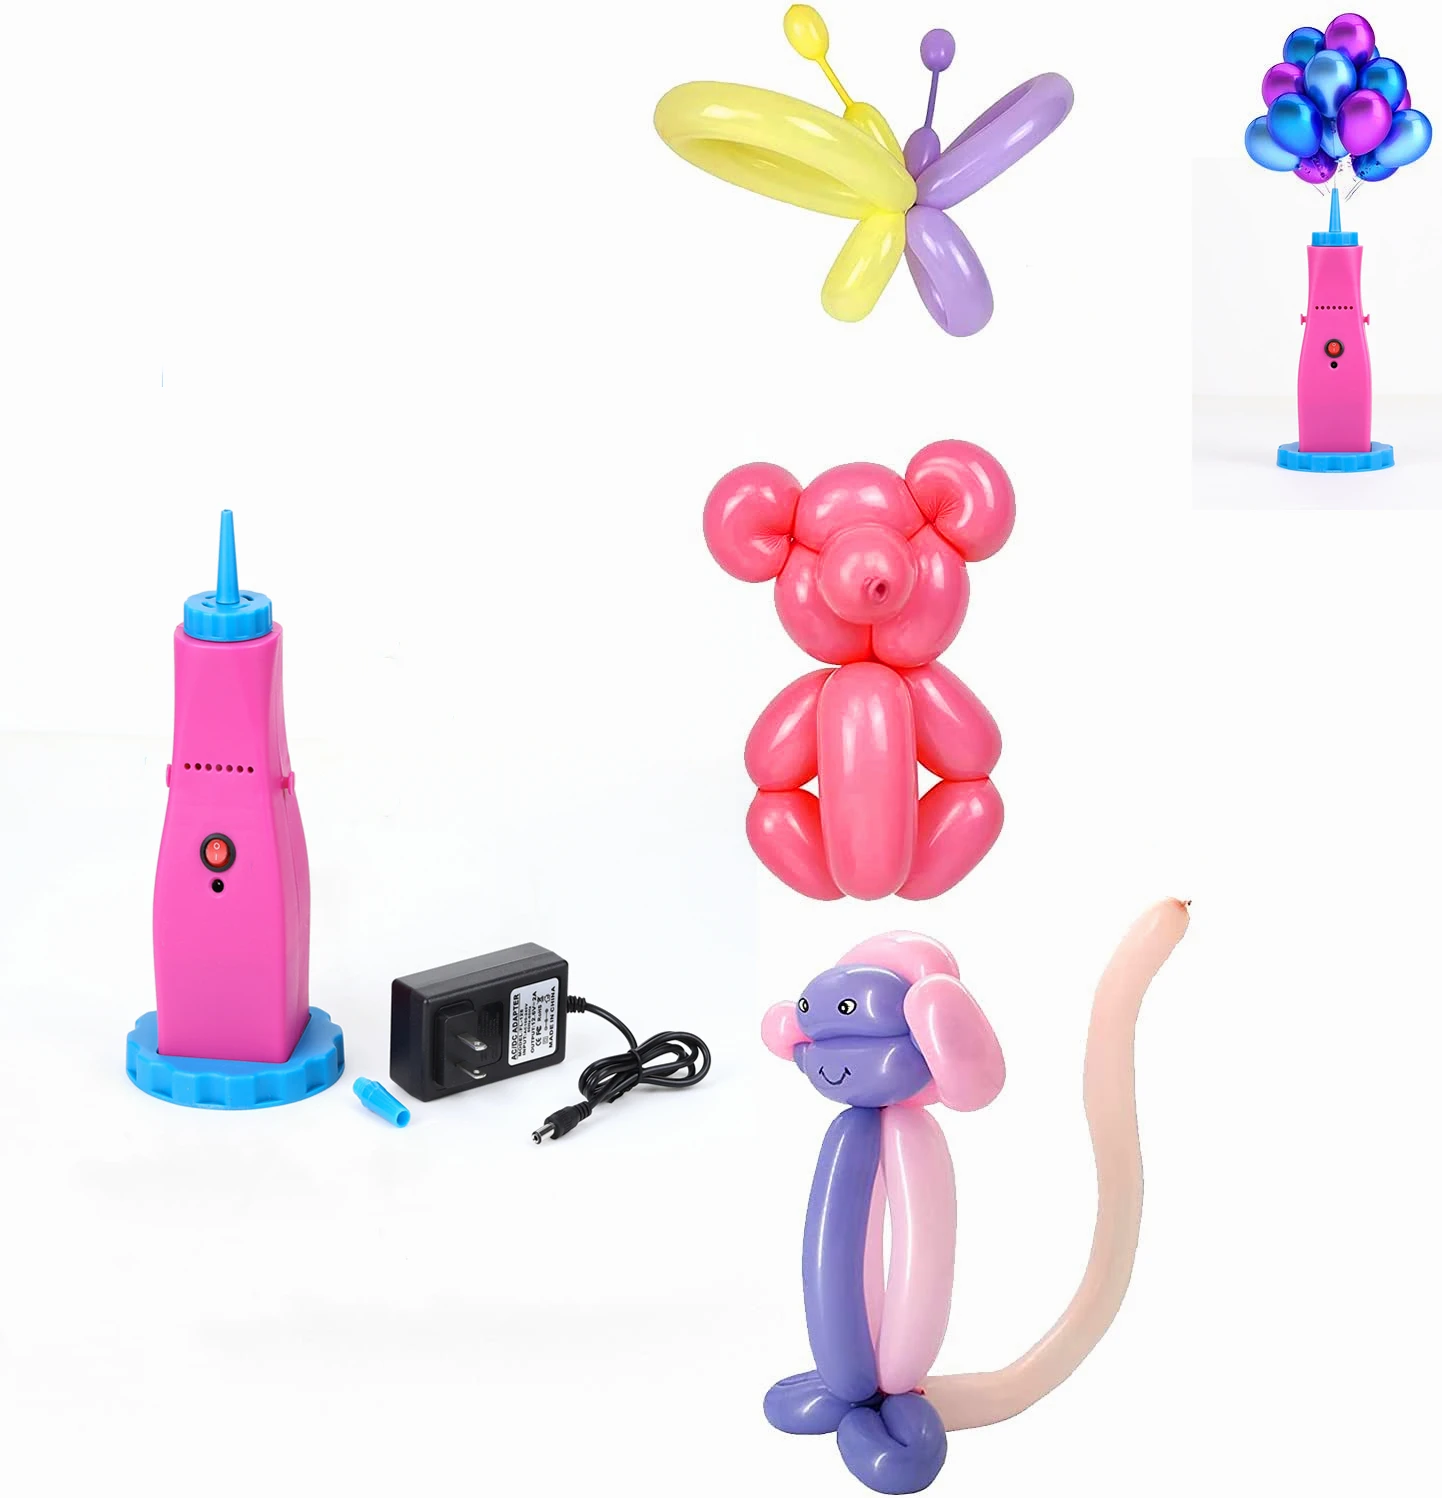 Portable Electric Twisting Balloon Pump Dc 12v Animal Balloon Air Blower Inflator  Pump For Long Magic Balloons - Buy Long Balloon Electric Pump Electric Twisting  Balloon Pump Animal Balloon Air Blower Inflator,New